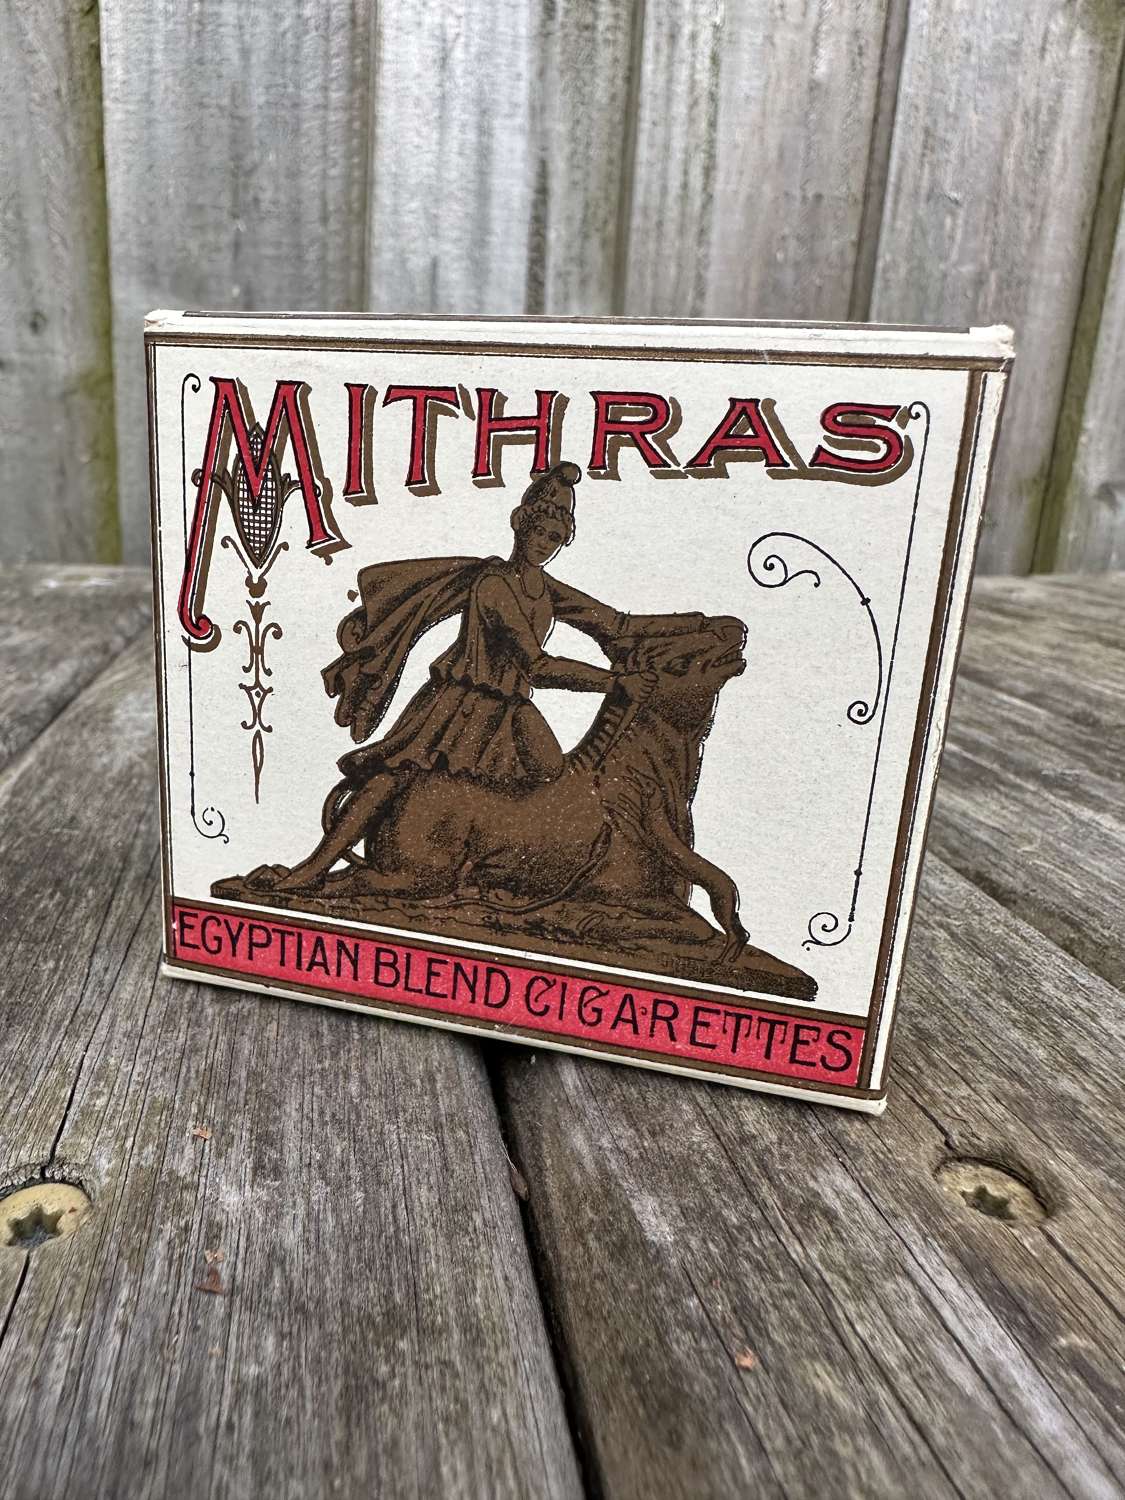 Very unusual mithras live cigarette pack